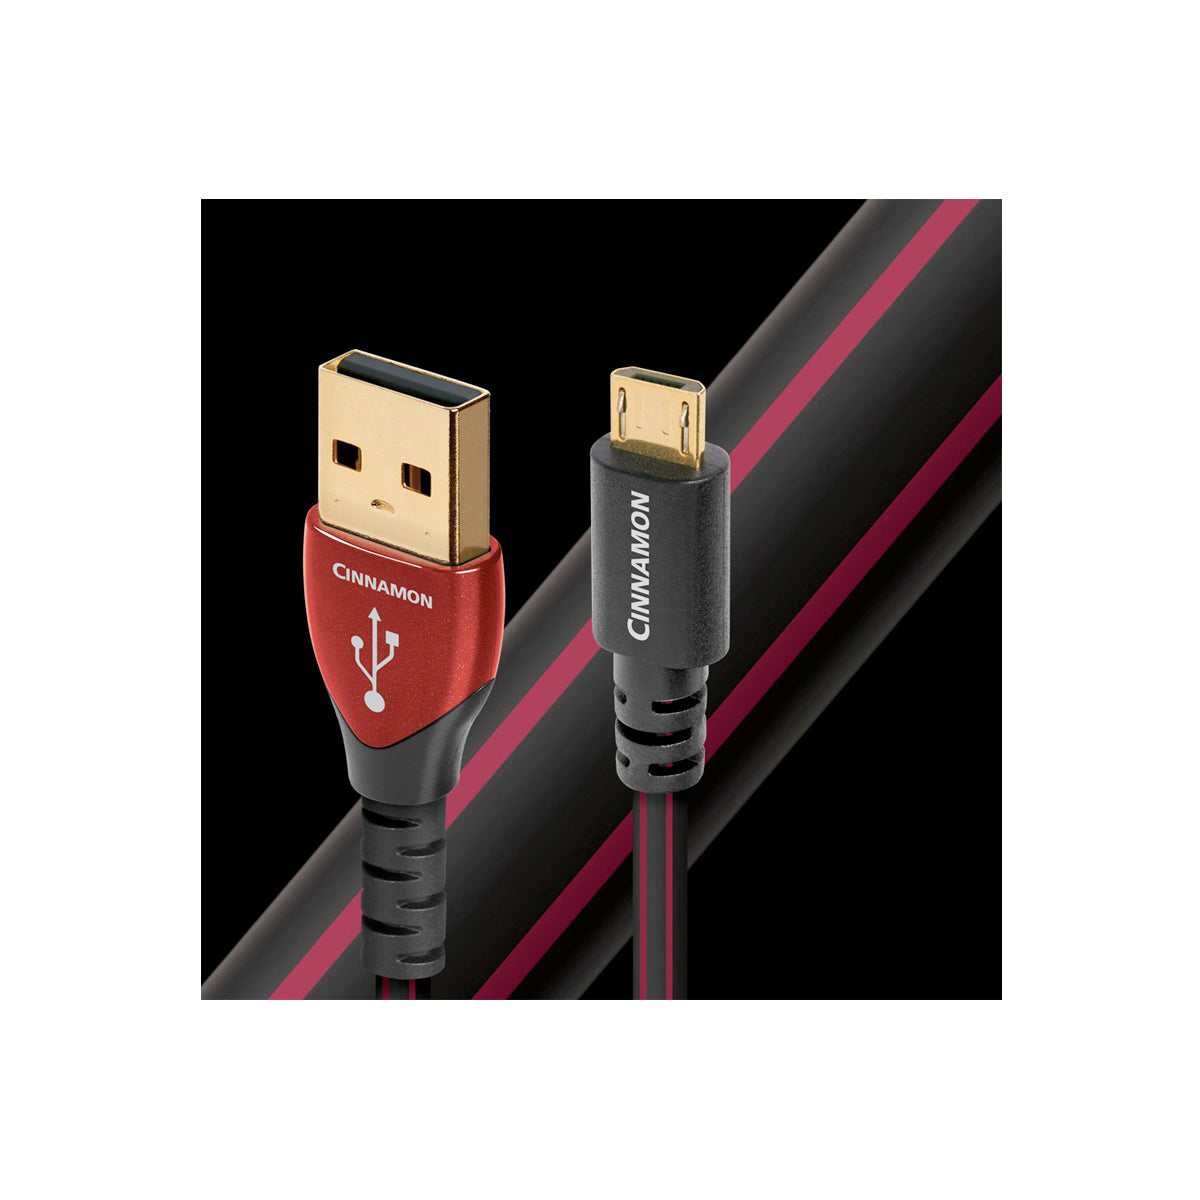 Audioquest USB Cable - CINNAMON - The Audio Experts